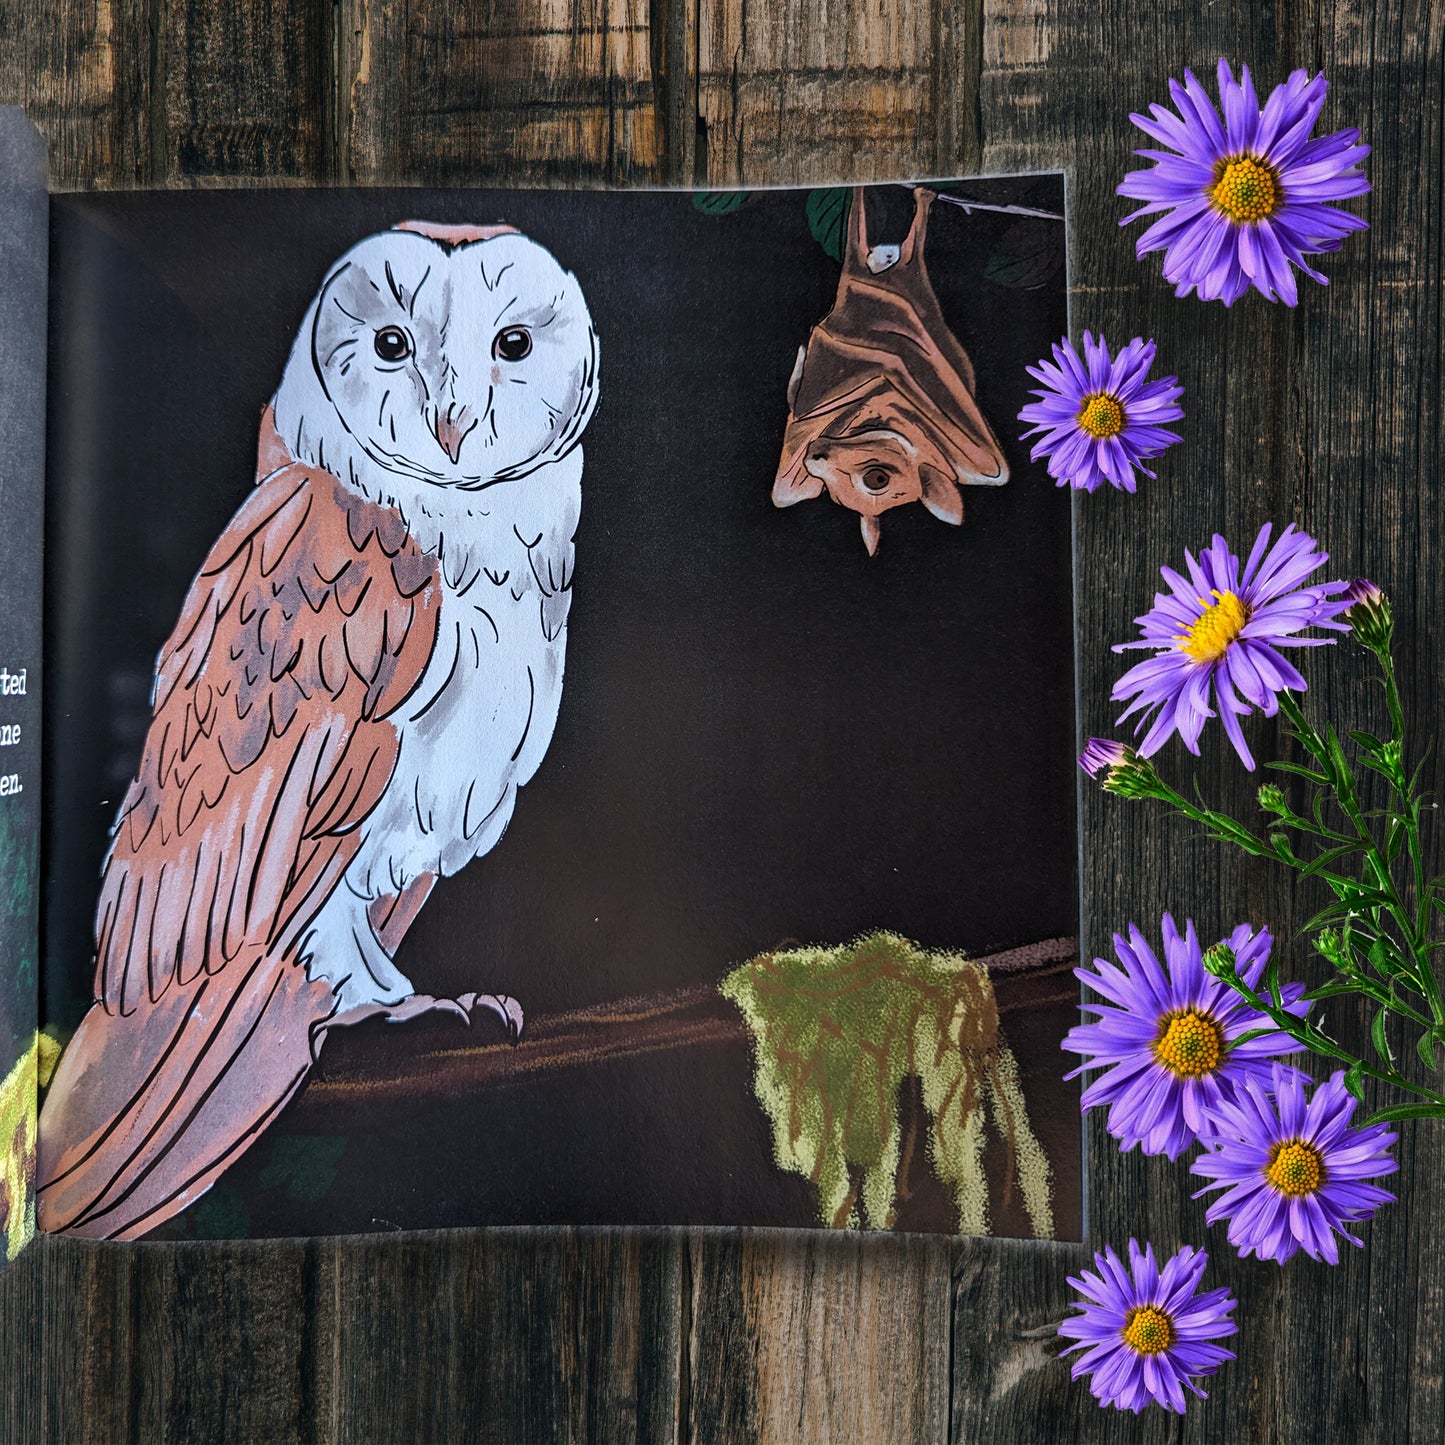 The Spooky Barn Owl Illustrated Children's Book SIGNED By Author, Alyssa Hughes